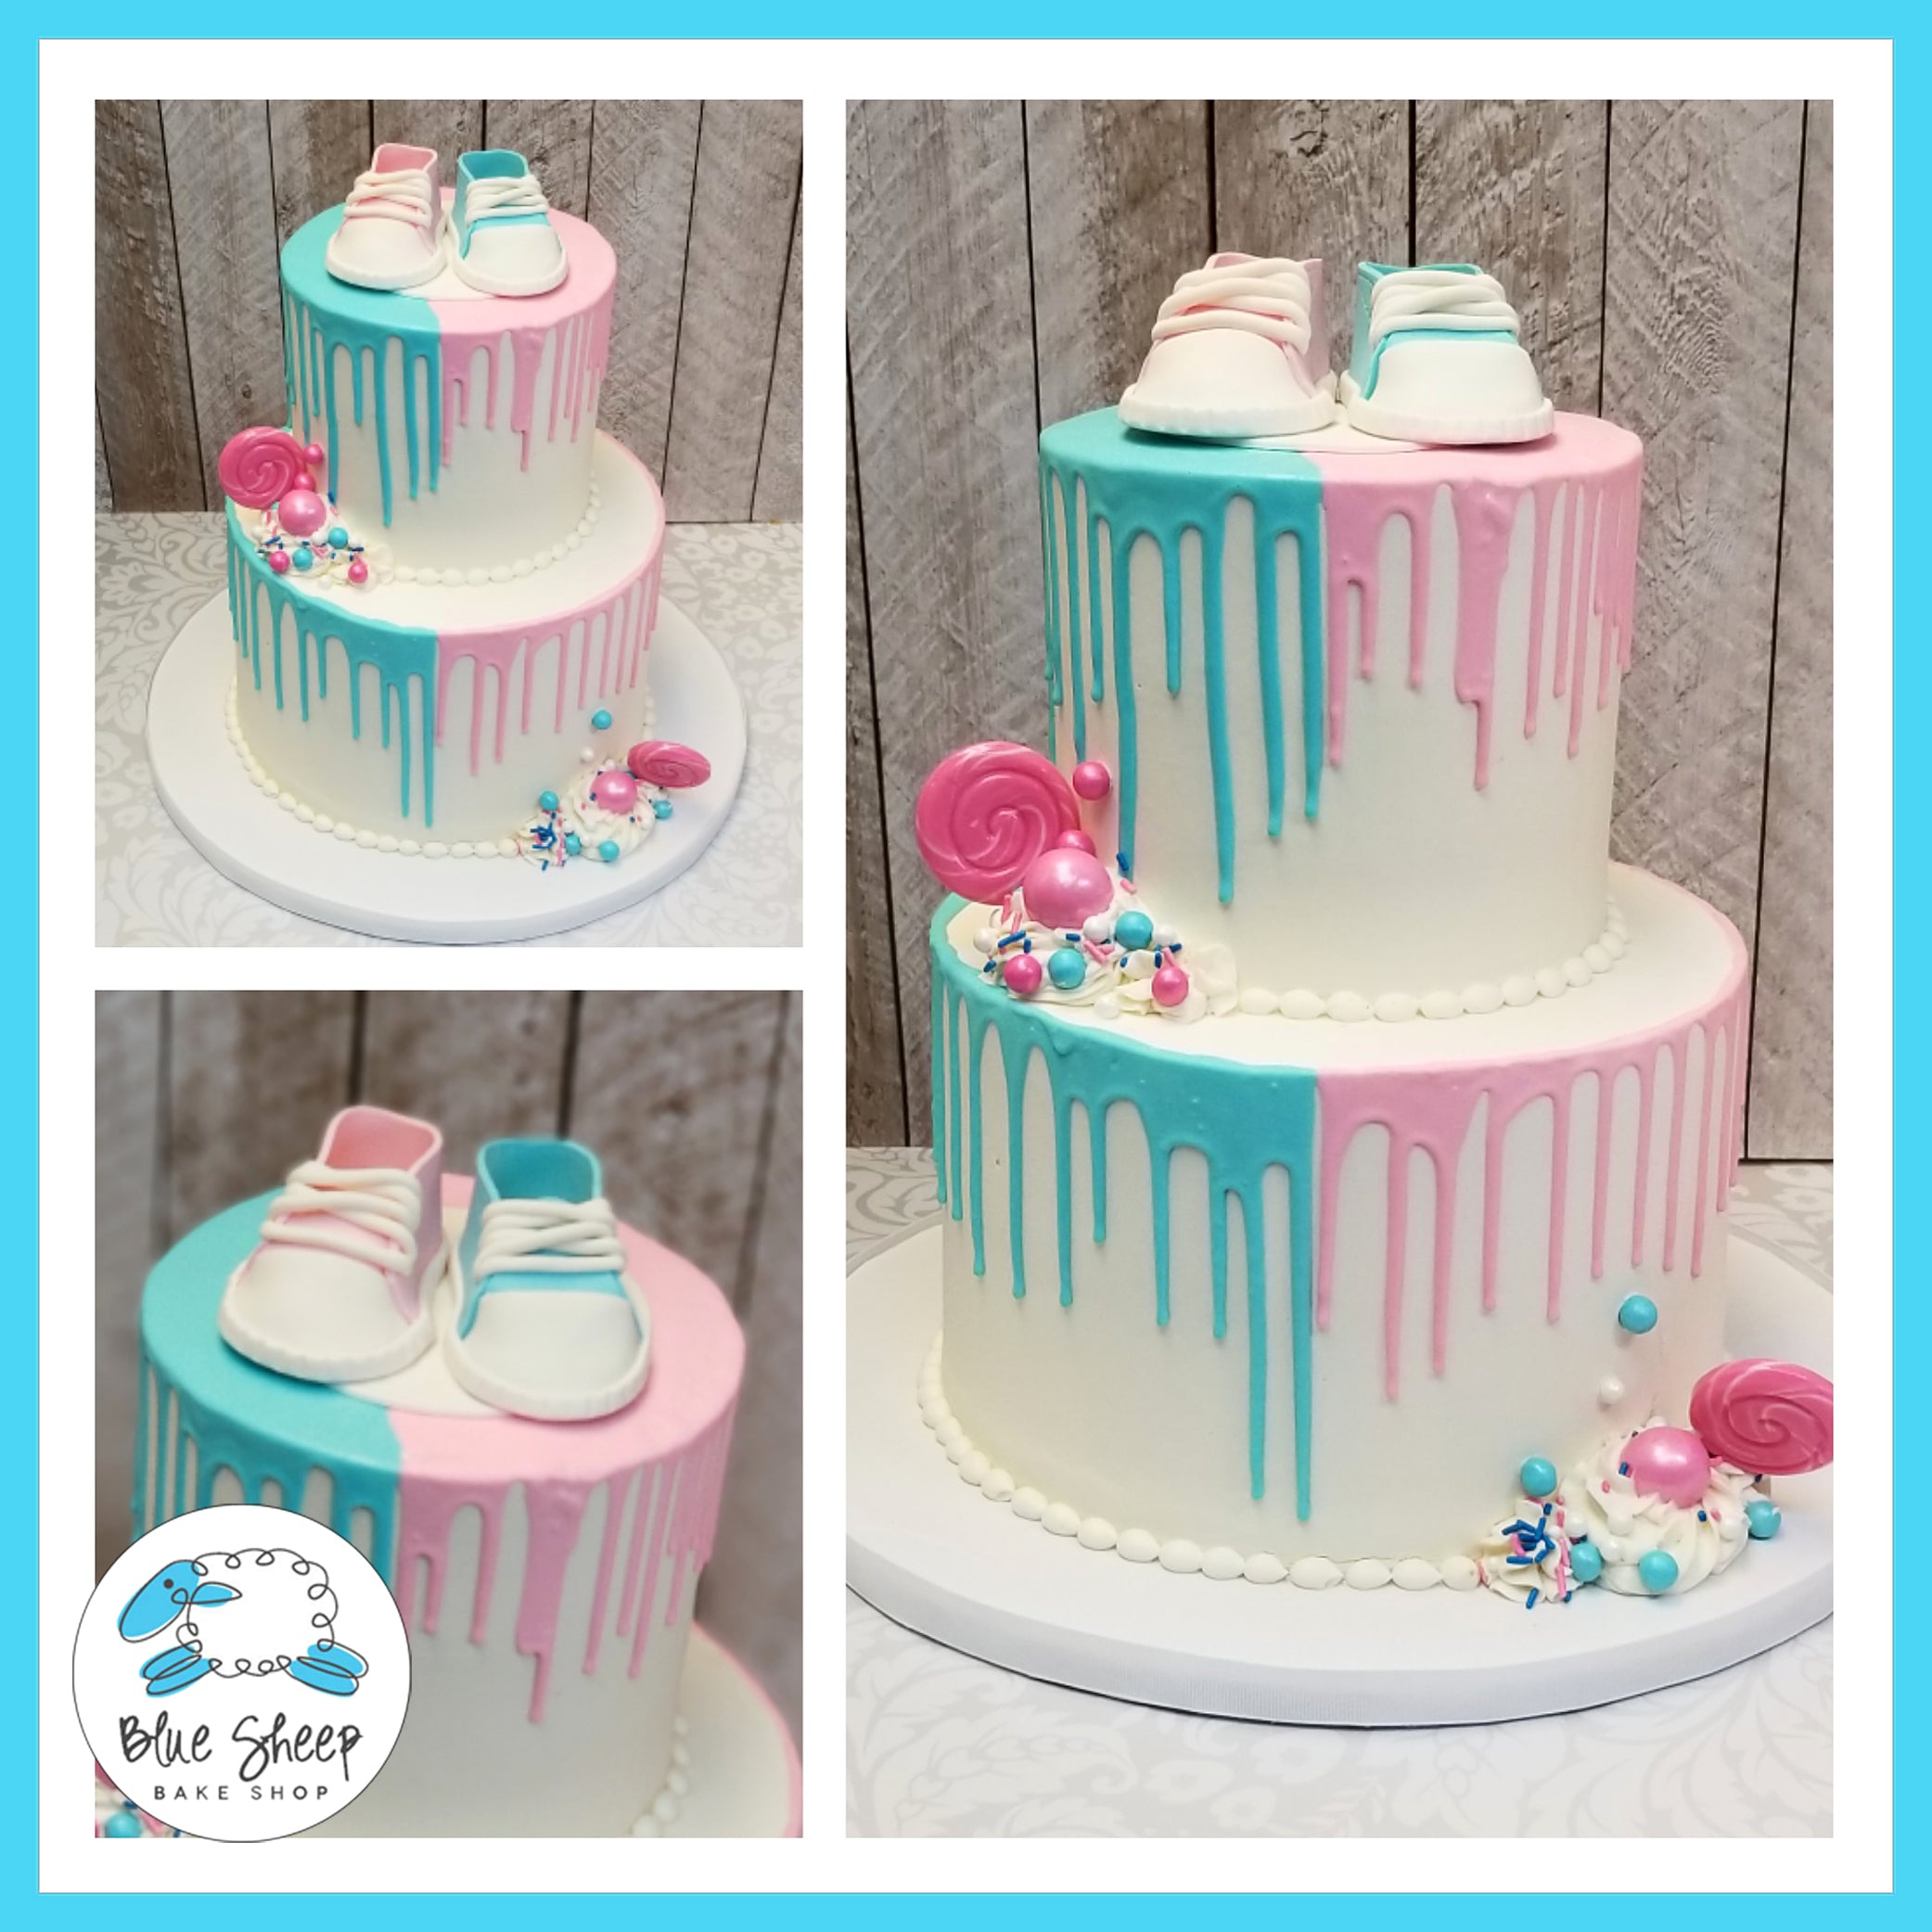 Pink And Blue Baby Shower Cake With Baby Sneakers Nj Blue Sheep Bake Shop